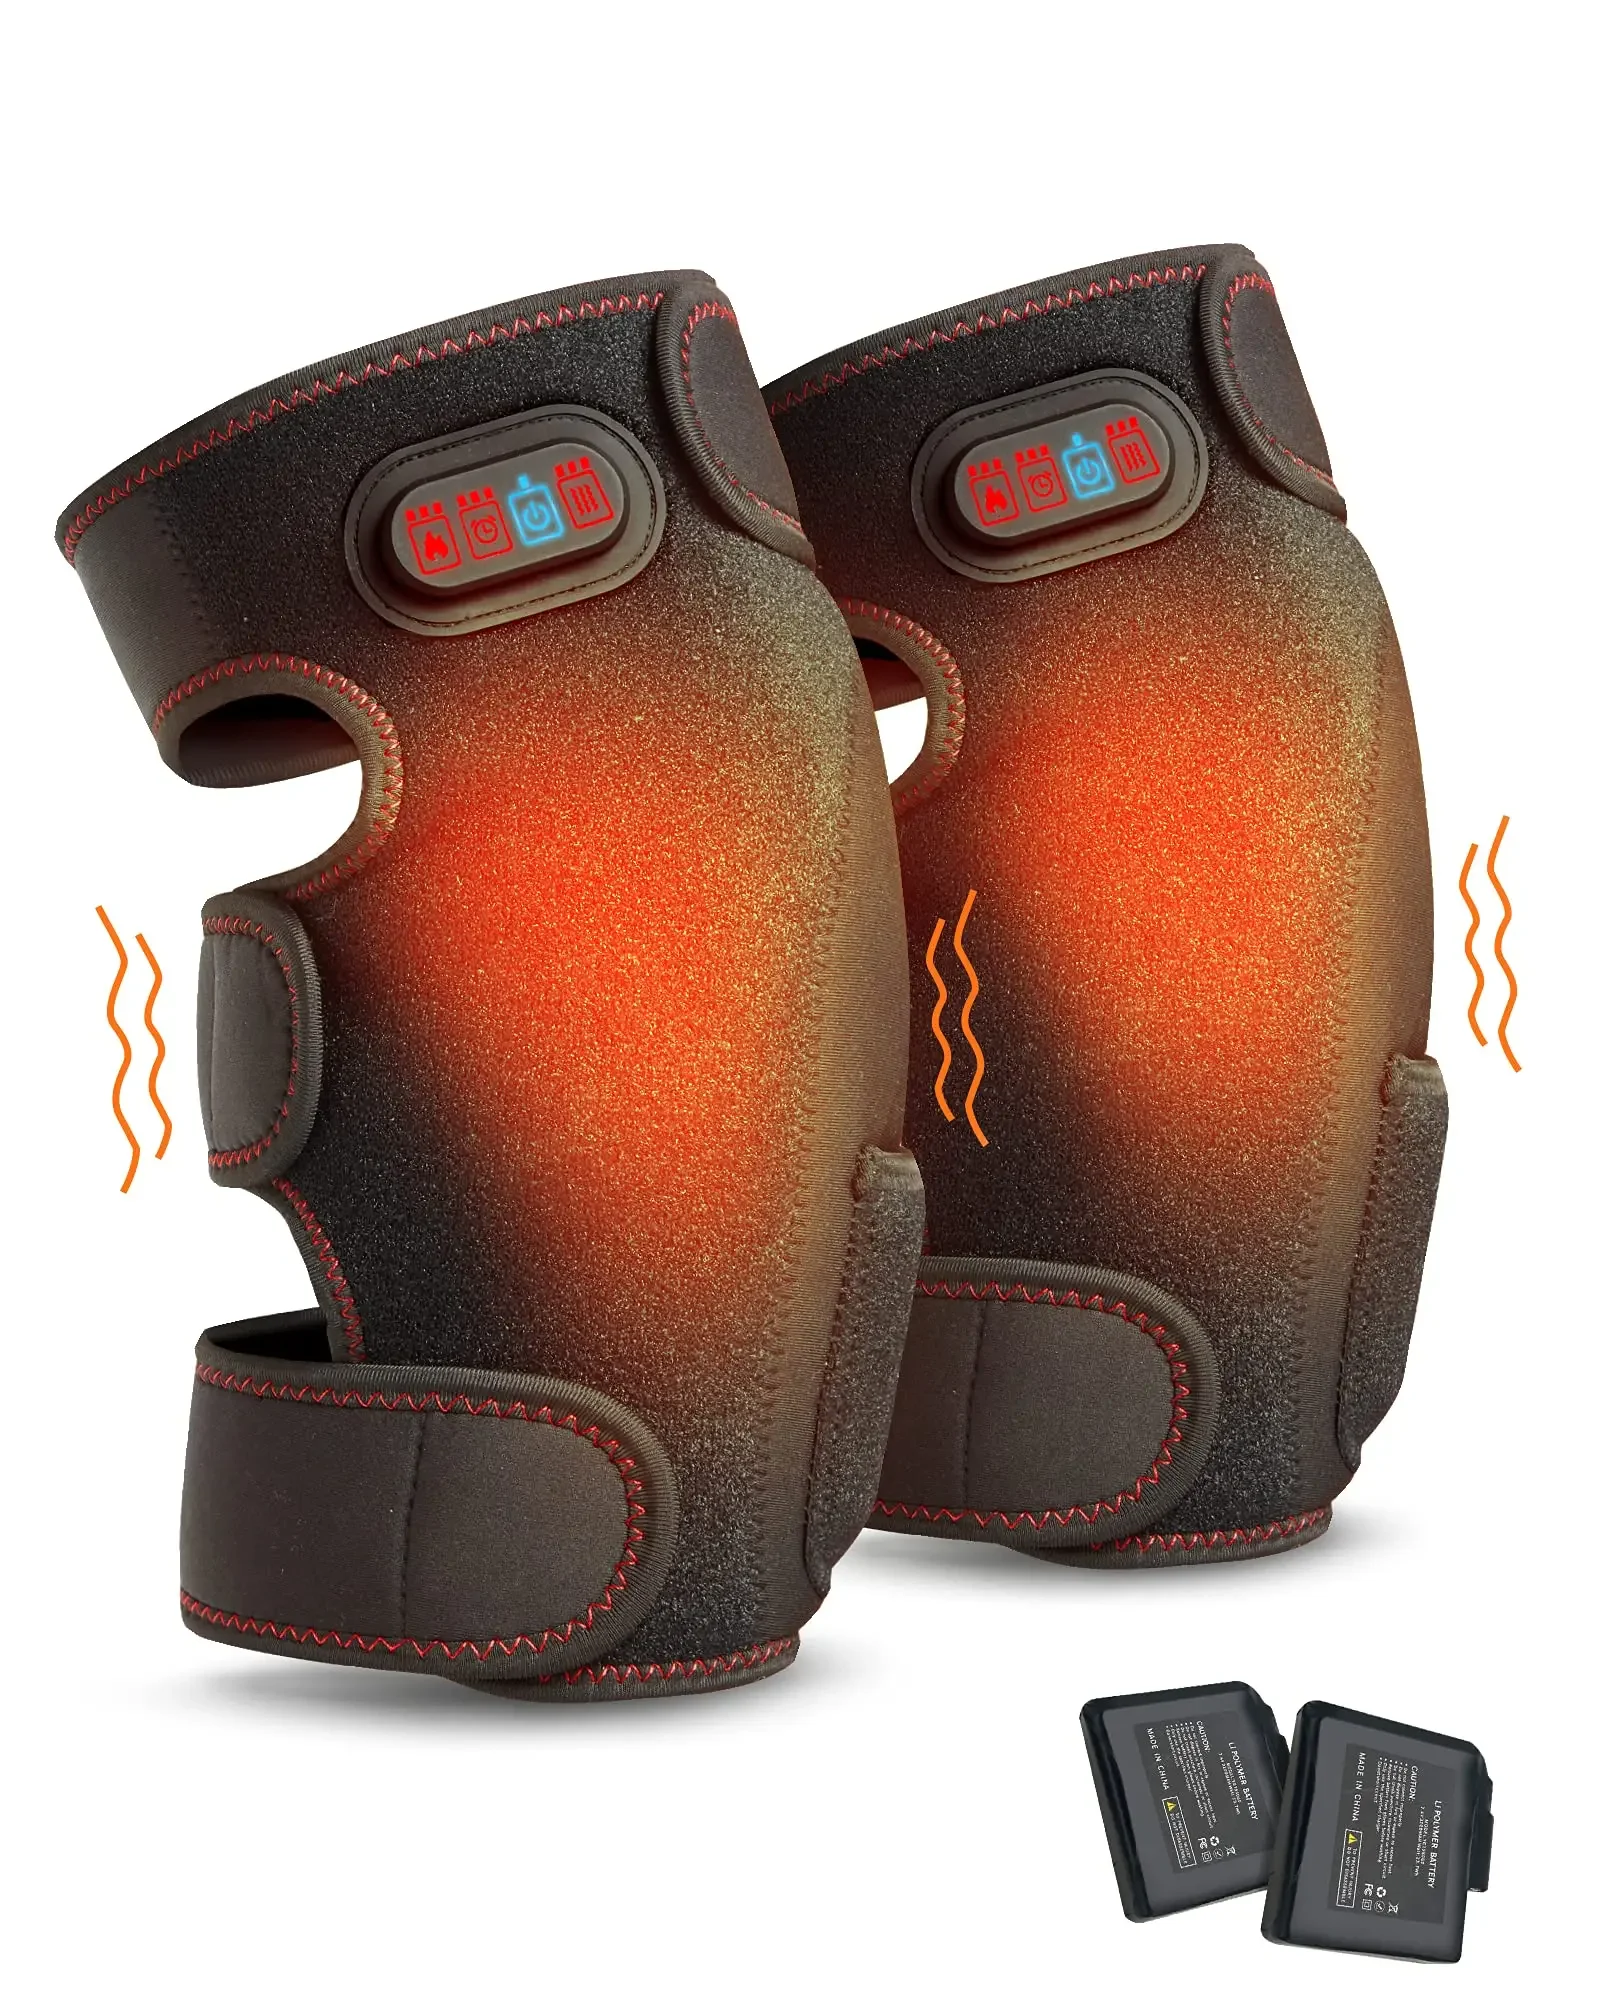 Heated Knee Brace Wrap - Battery Powered Knee Heating Pad Vibration Massager for Knee Pain Relief (1 Pair) electric cordless therapy heated vibration knee massager heating pad for knee elbow shoulder leg relax joint pain relief gifts